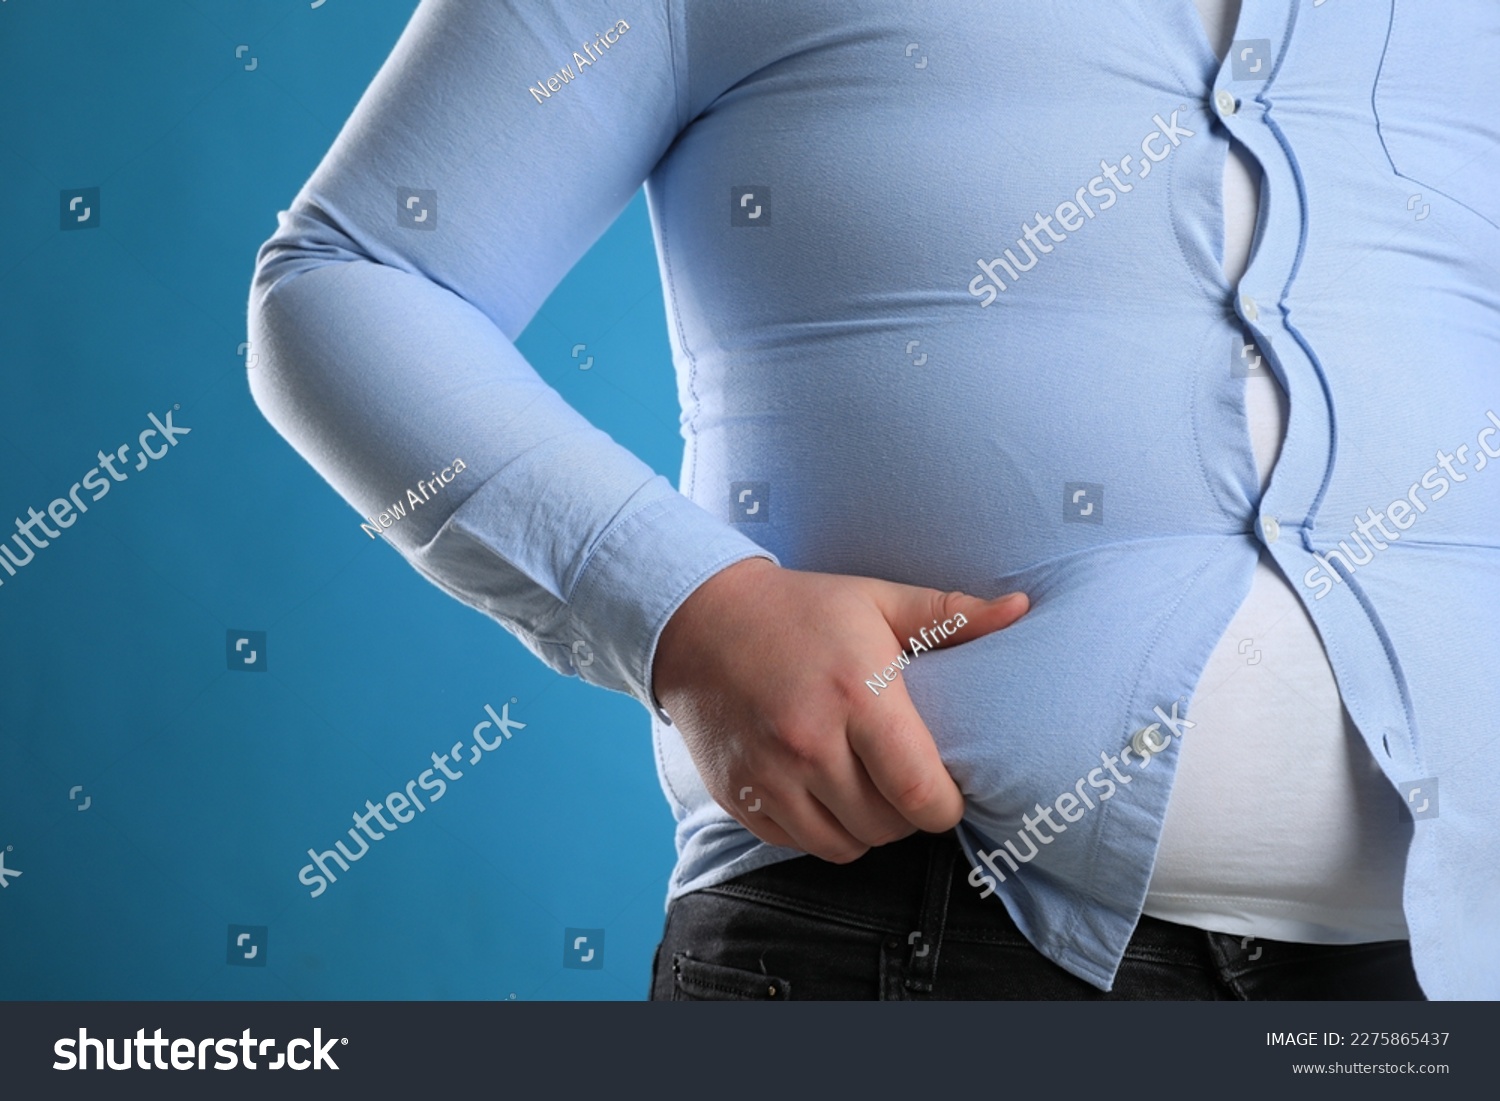 Overweight man in tight shirt on light blue background, closeup #2275865437